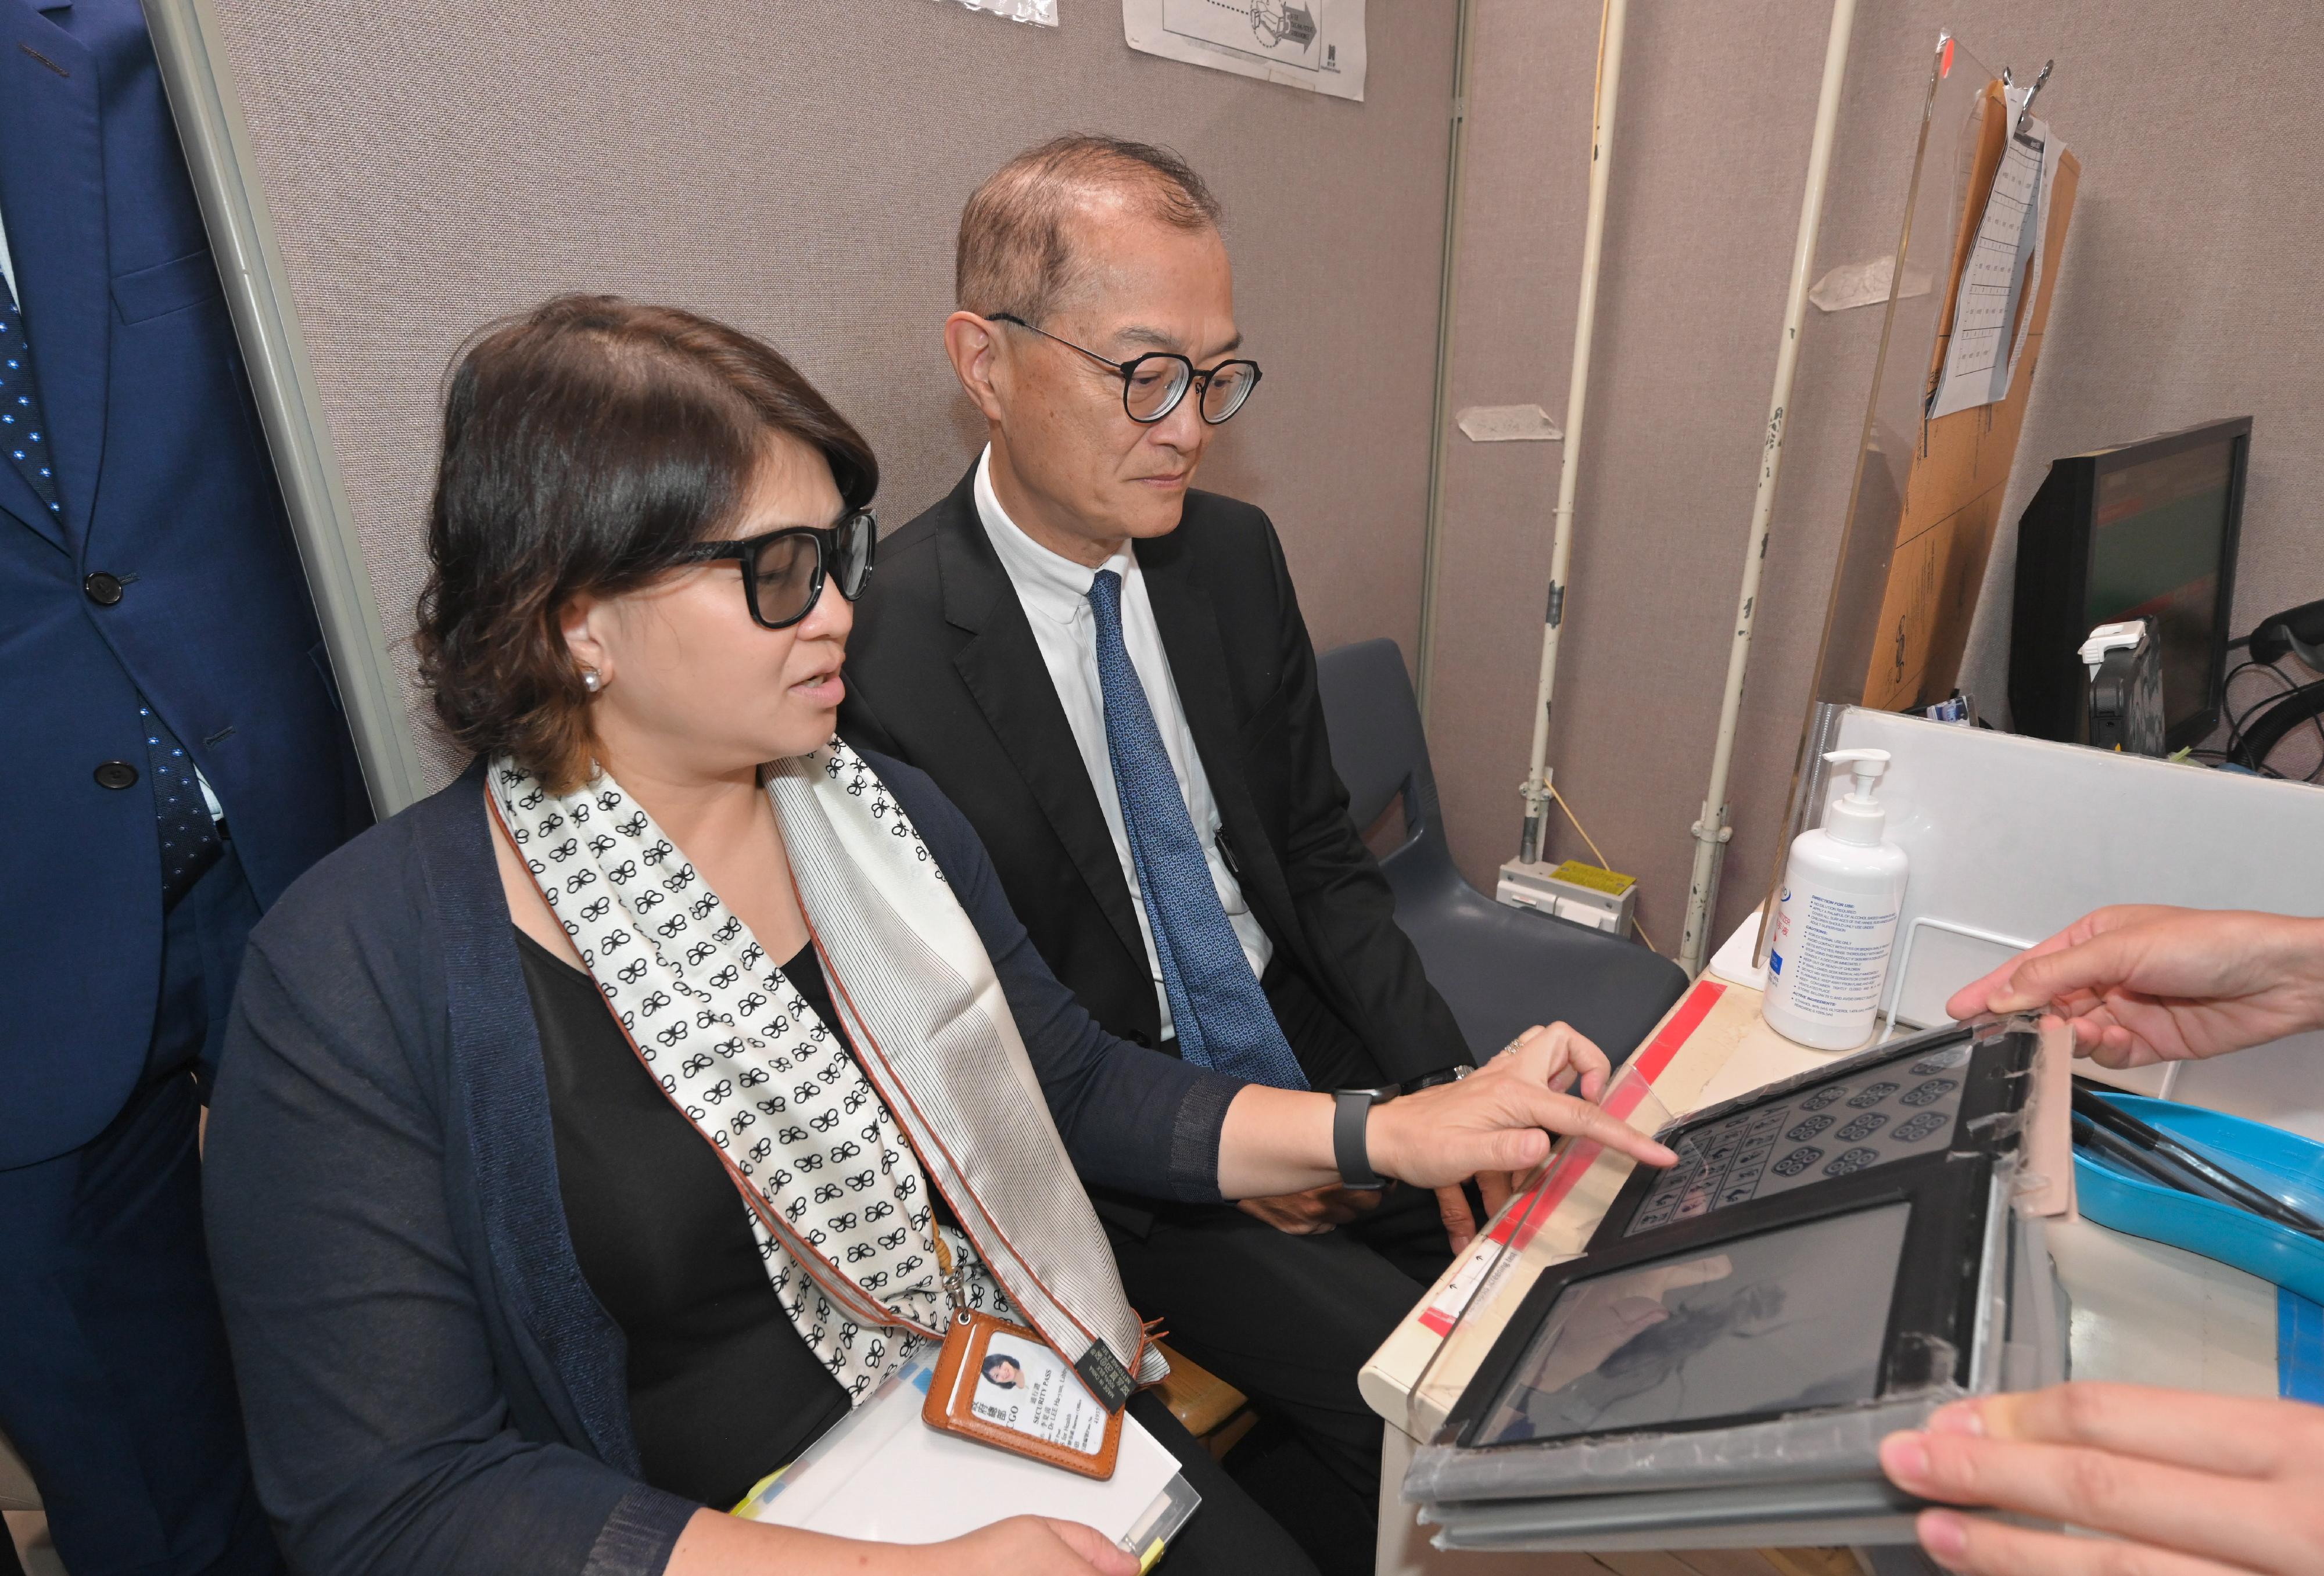 The Secretary for Health, Professor Lo Chung-mau (right), visited the Lam Tin Student Health Service Centre under the Department of Health this afternoon (August 15). Photo shows the Under Secretary for Health, Dr Libby Lee (left), taking part in an eye test at the Centre.